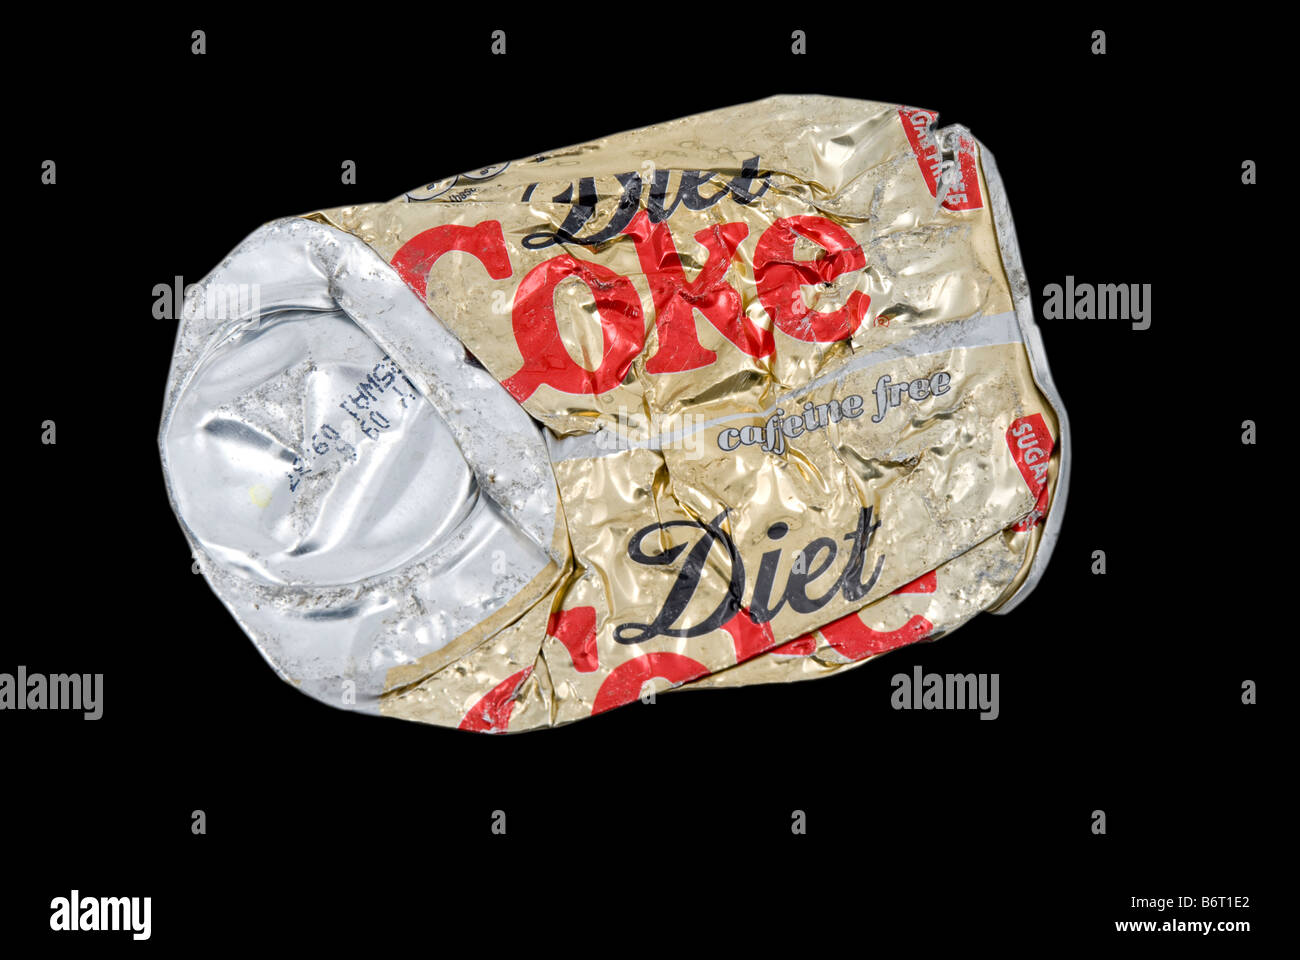 can of diet coke flattened Stock Photo